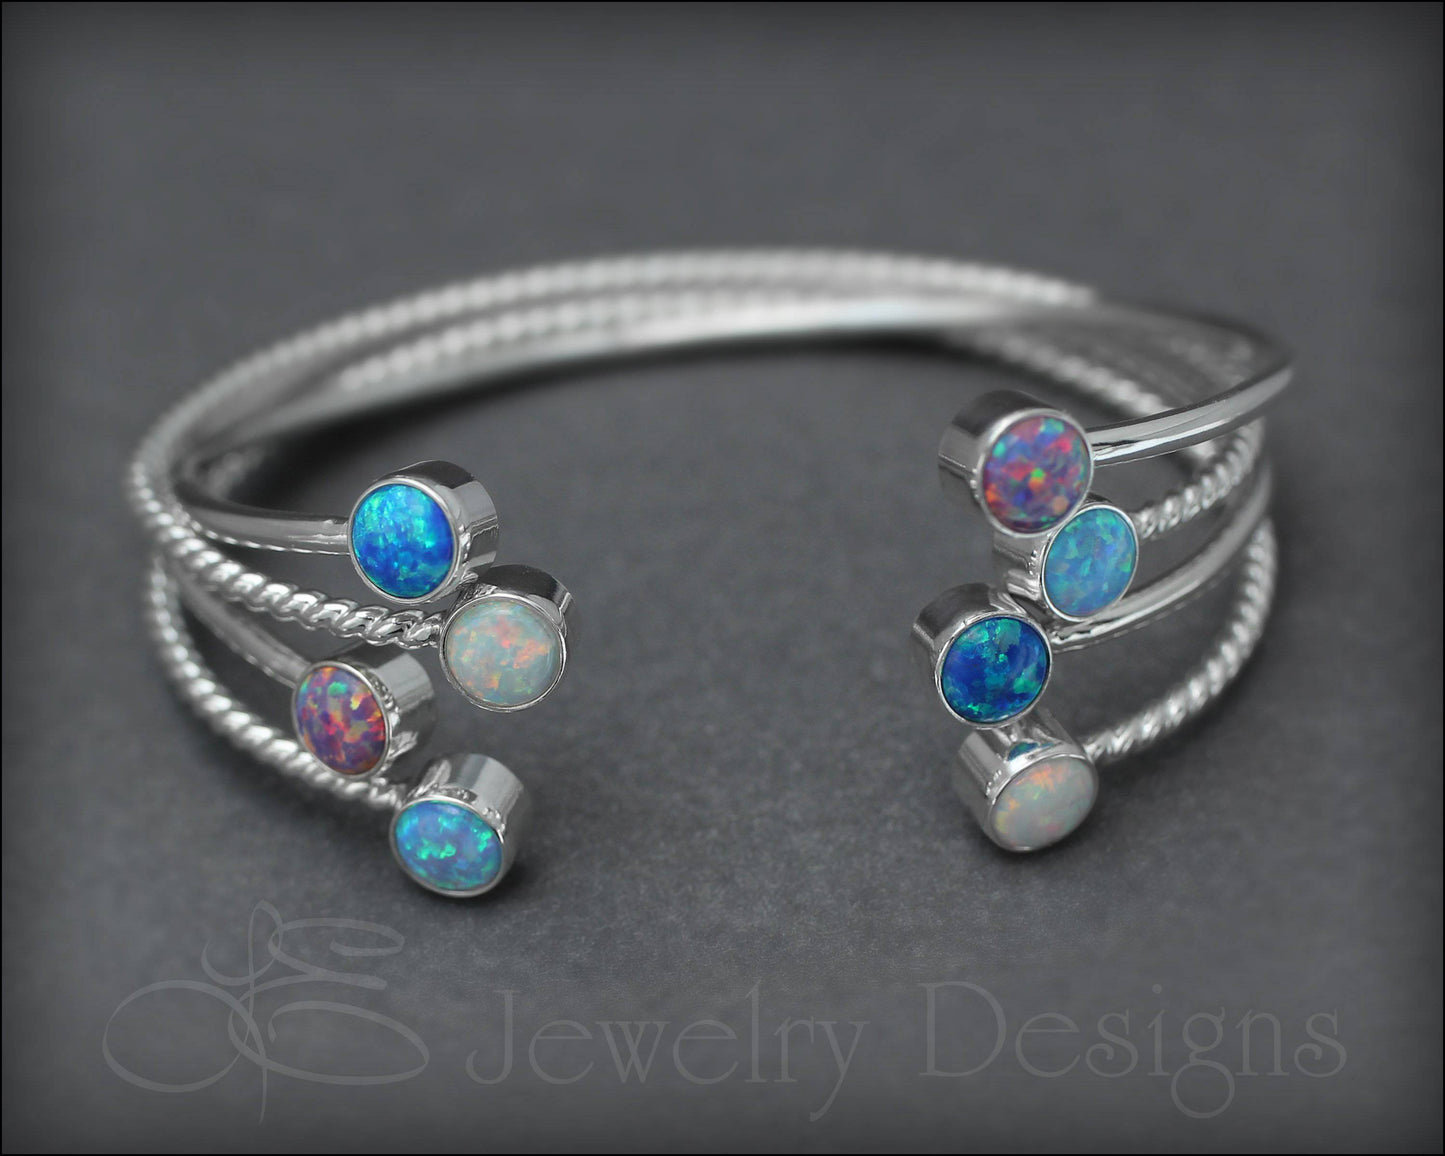 Load image into Gallery viewer, Dual Birthstone or Opal Bracelet - LE Jewelry Designs
